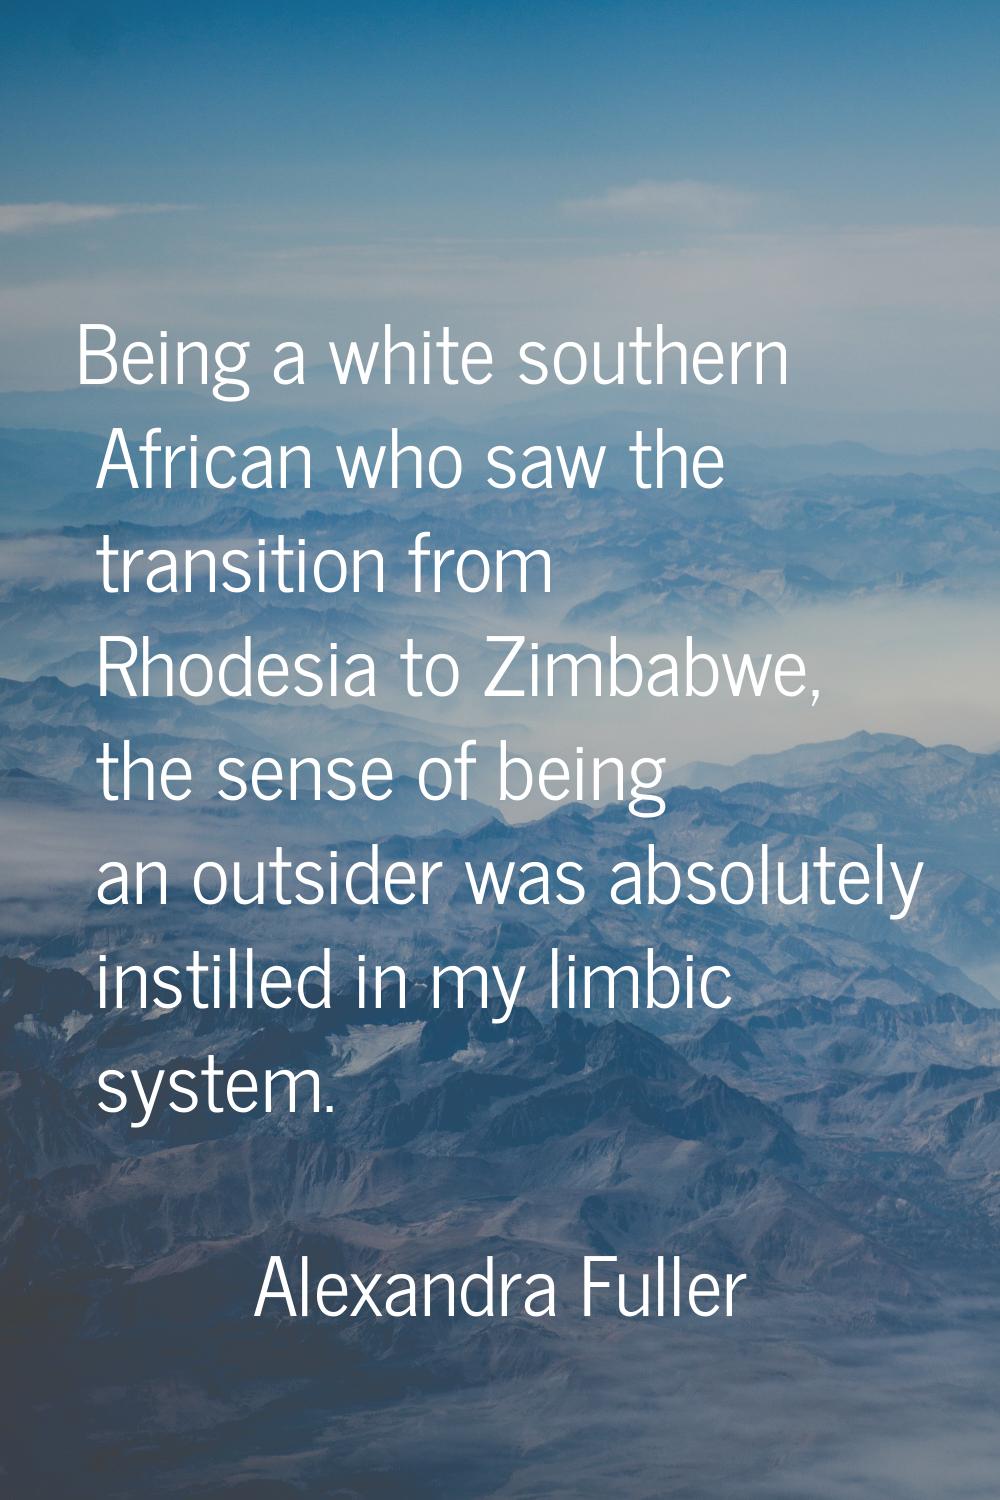 Being a white southern African who saw the transition from Rhodesia to Zimbabwe, the sense of being